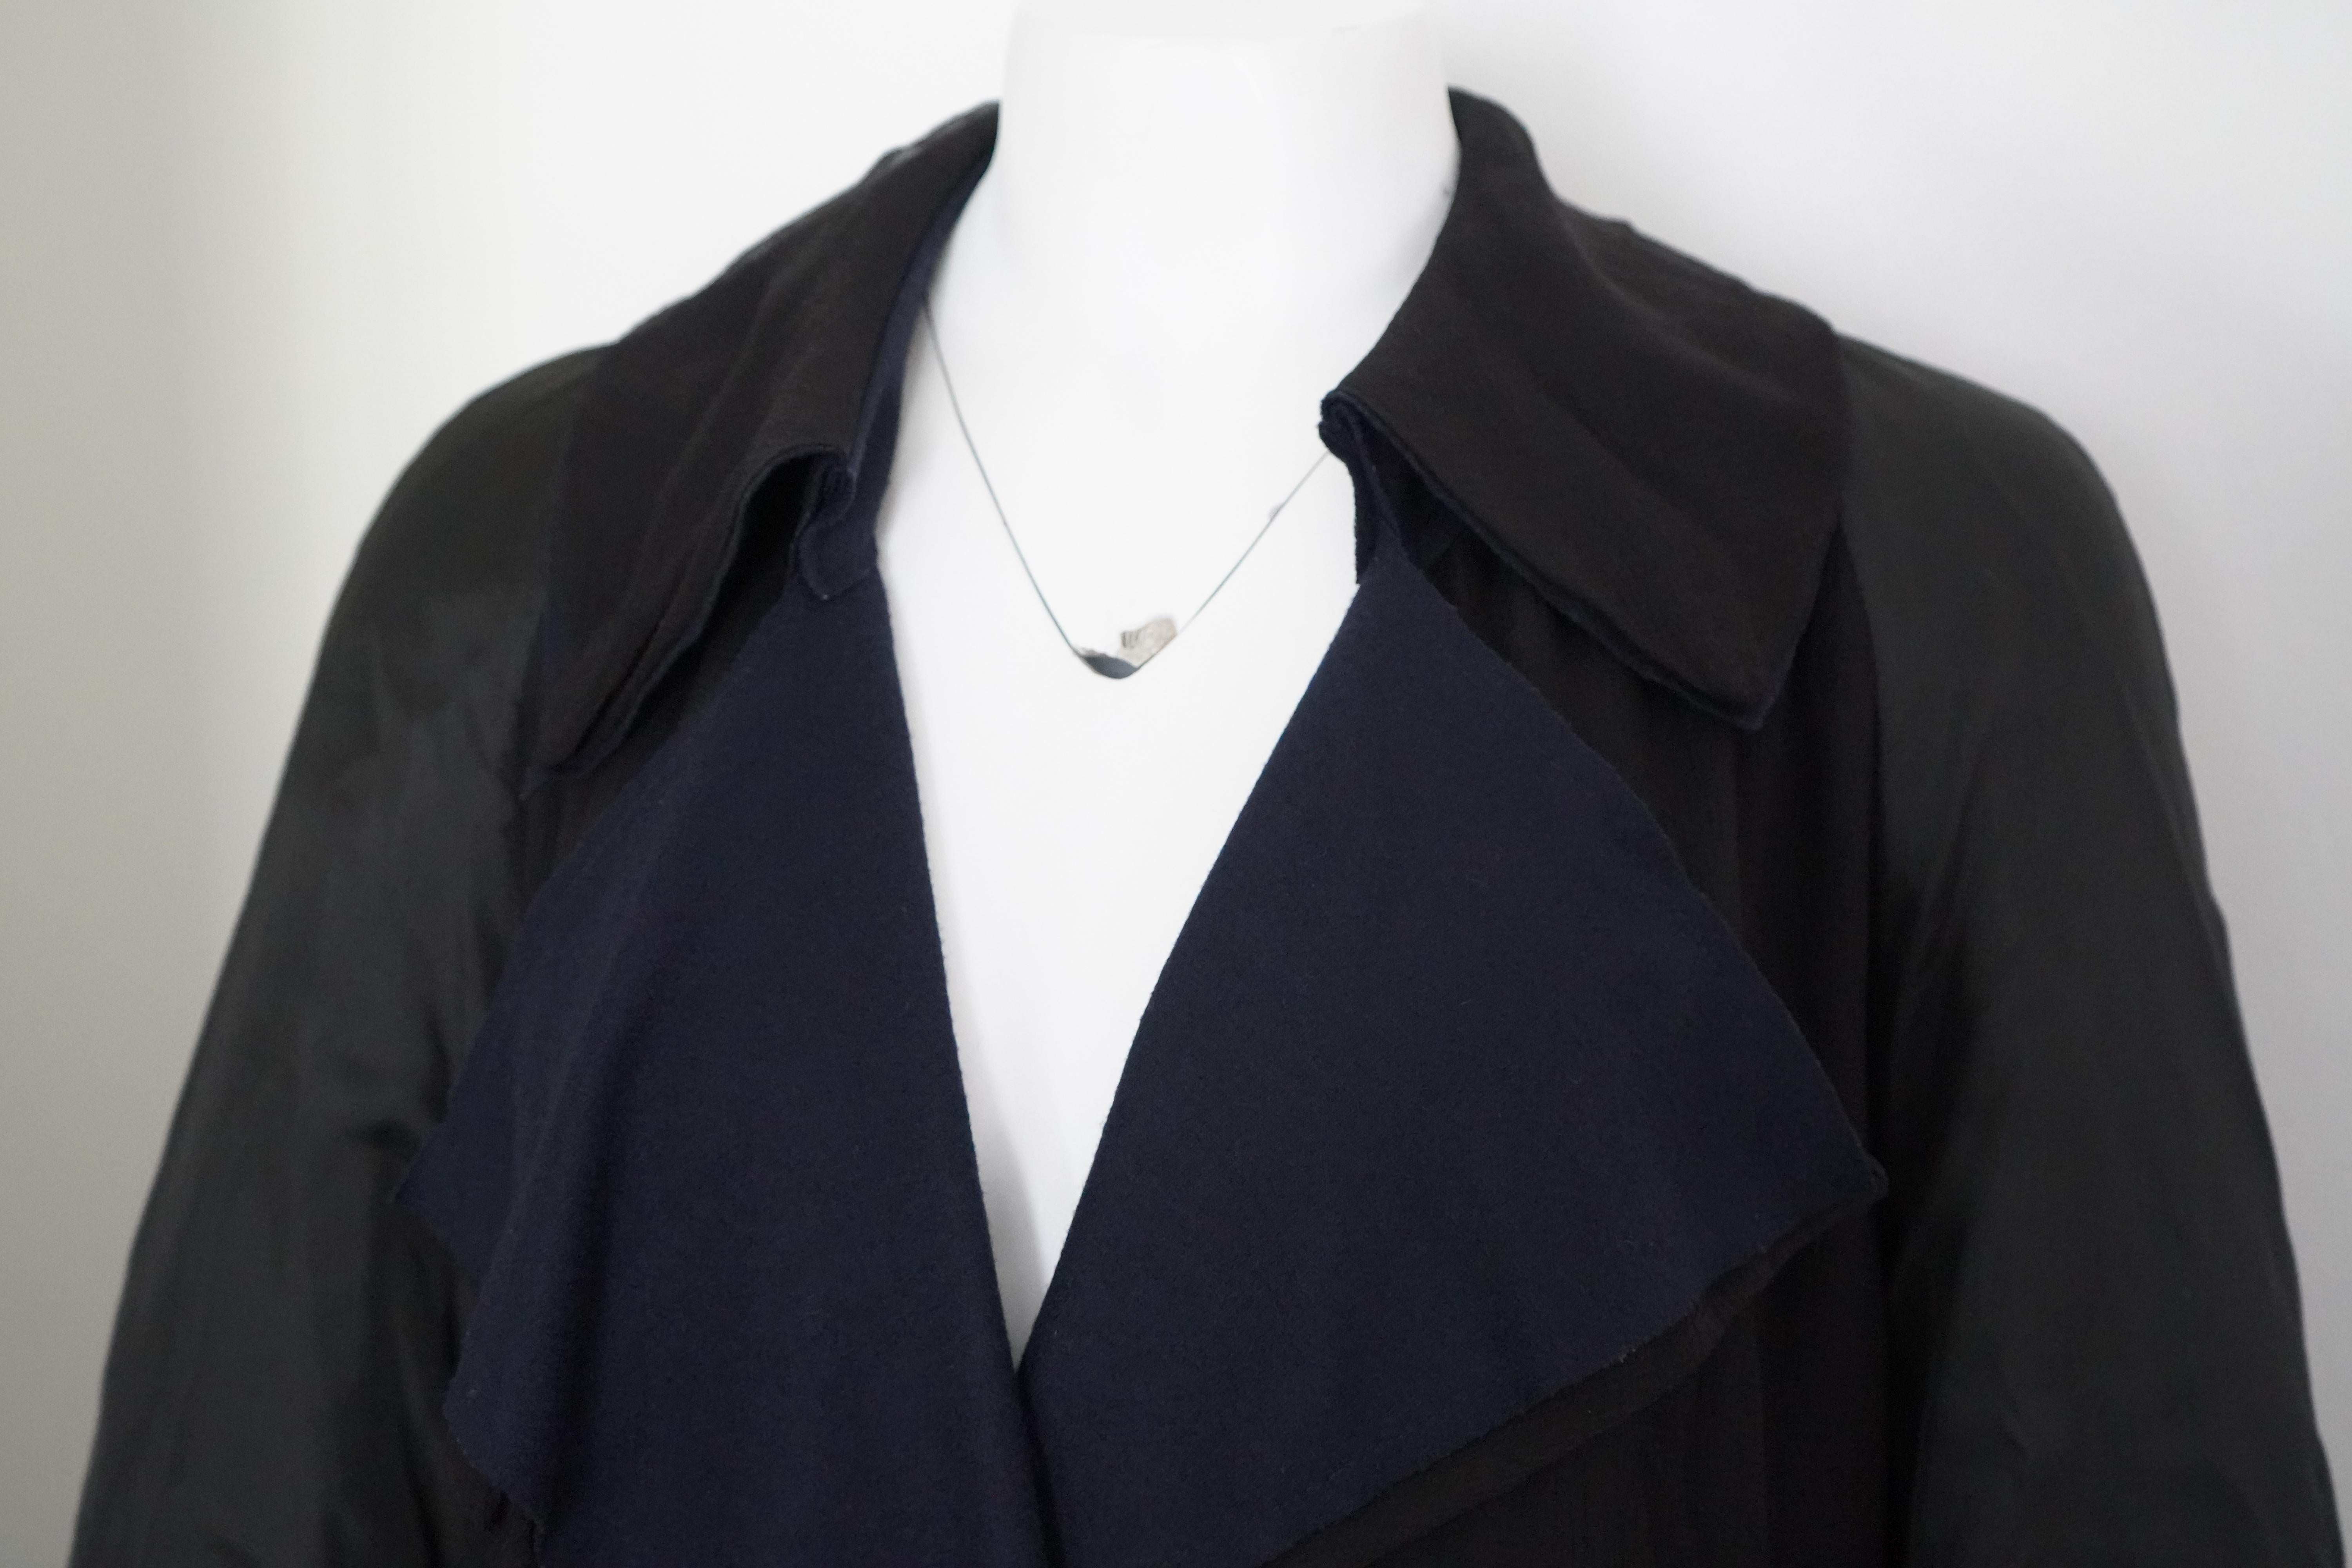 Lanvin Paris Silk Duster Coat Black & Navy  In Excellent Condition For Sale In Beverly Hills, CA